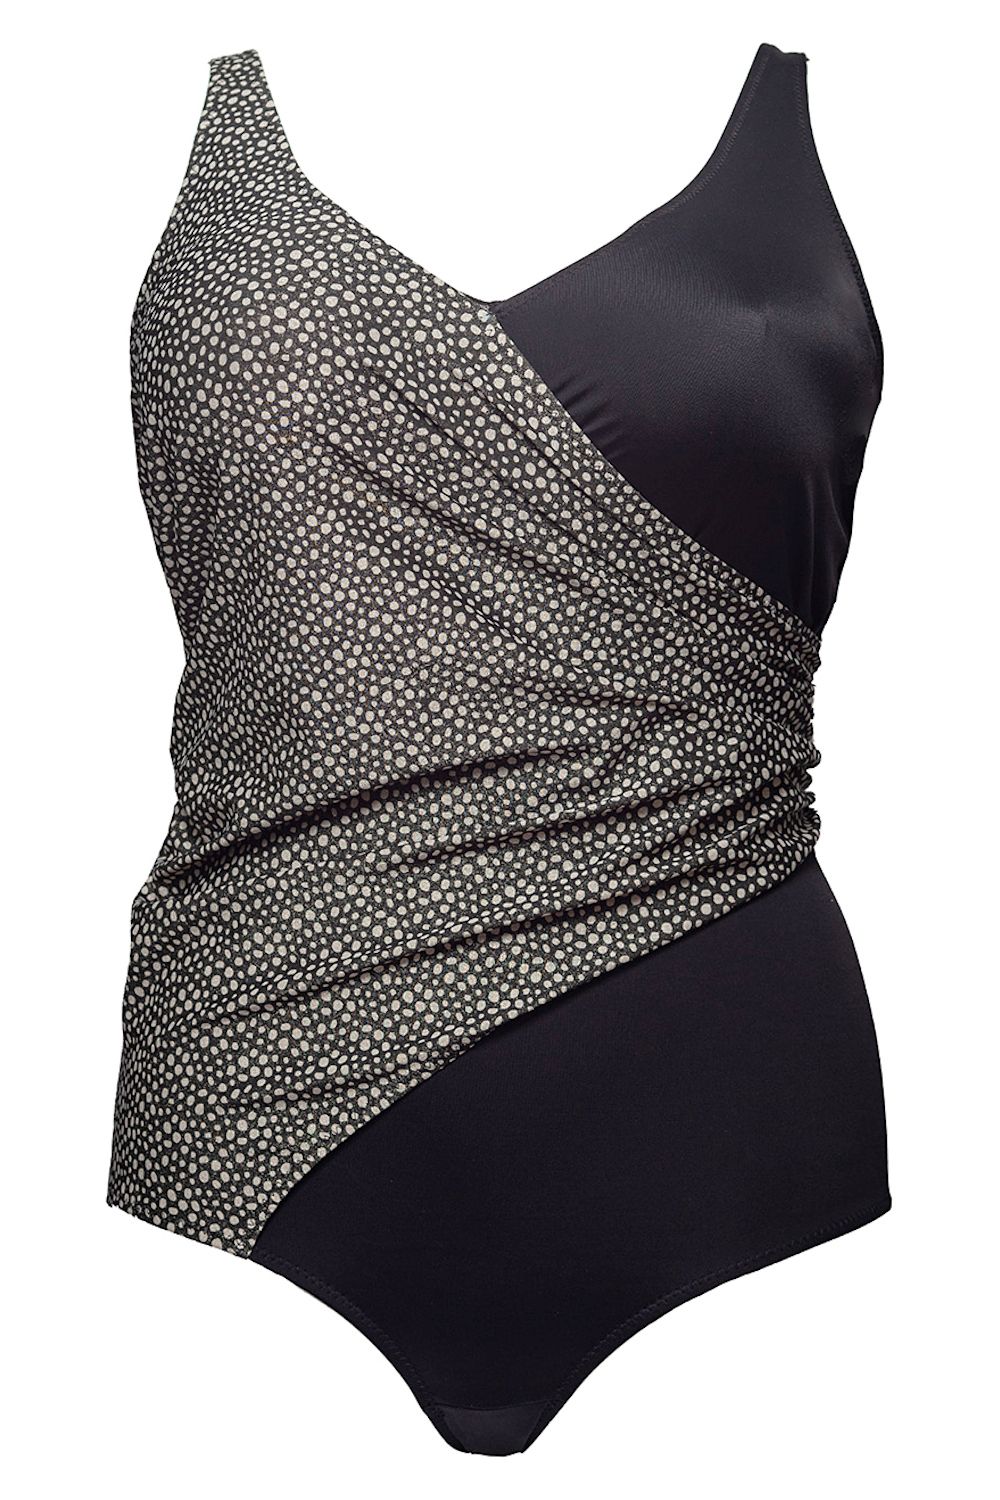 Plaisir Pearl Faux Wrap Swimsuit Black/Grey with Glitter